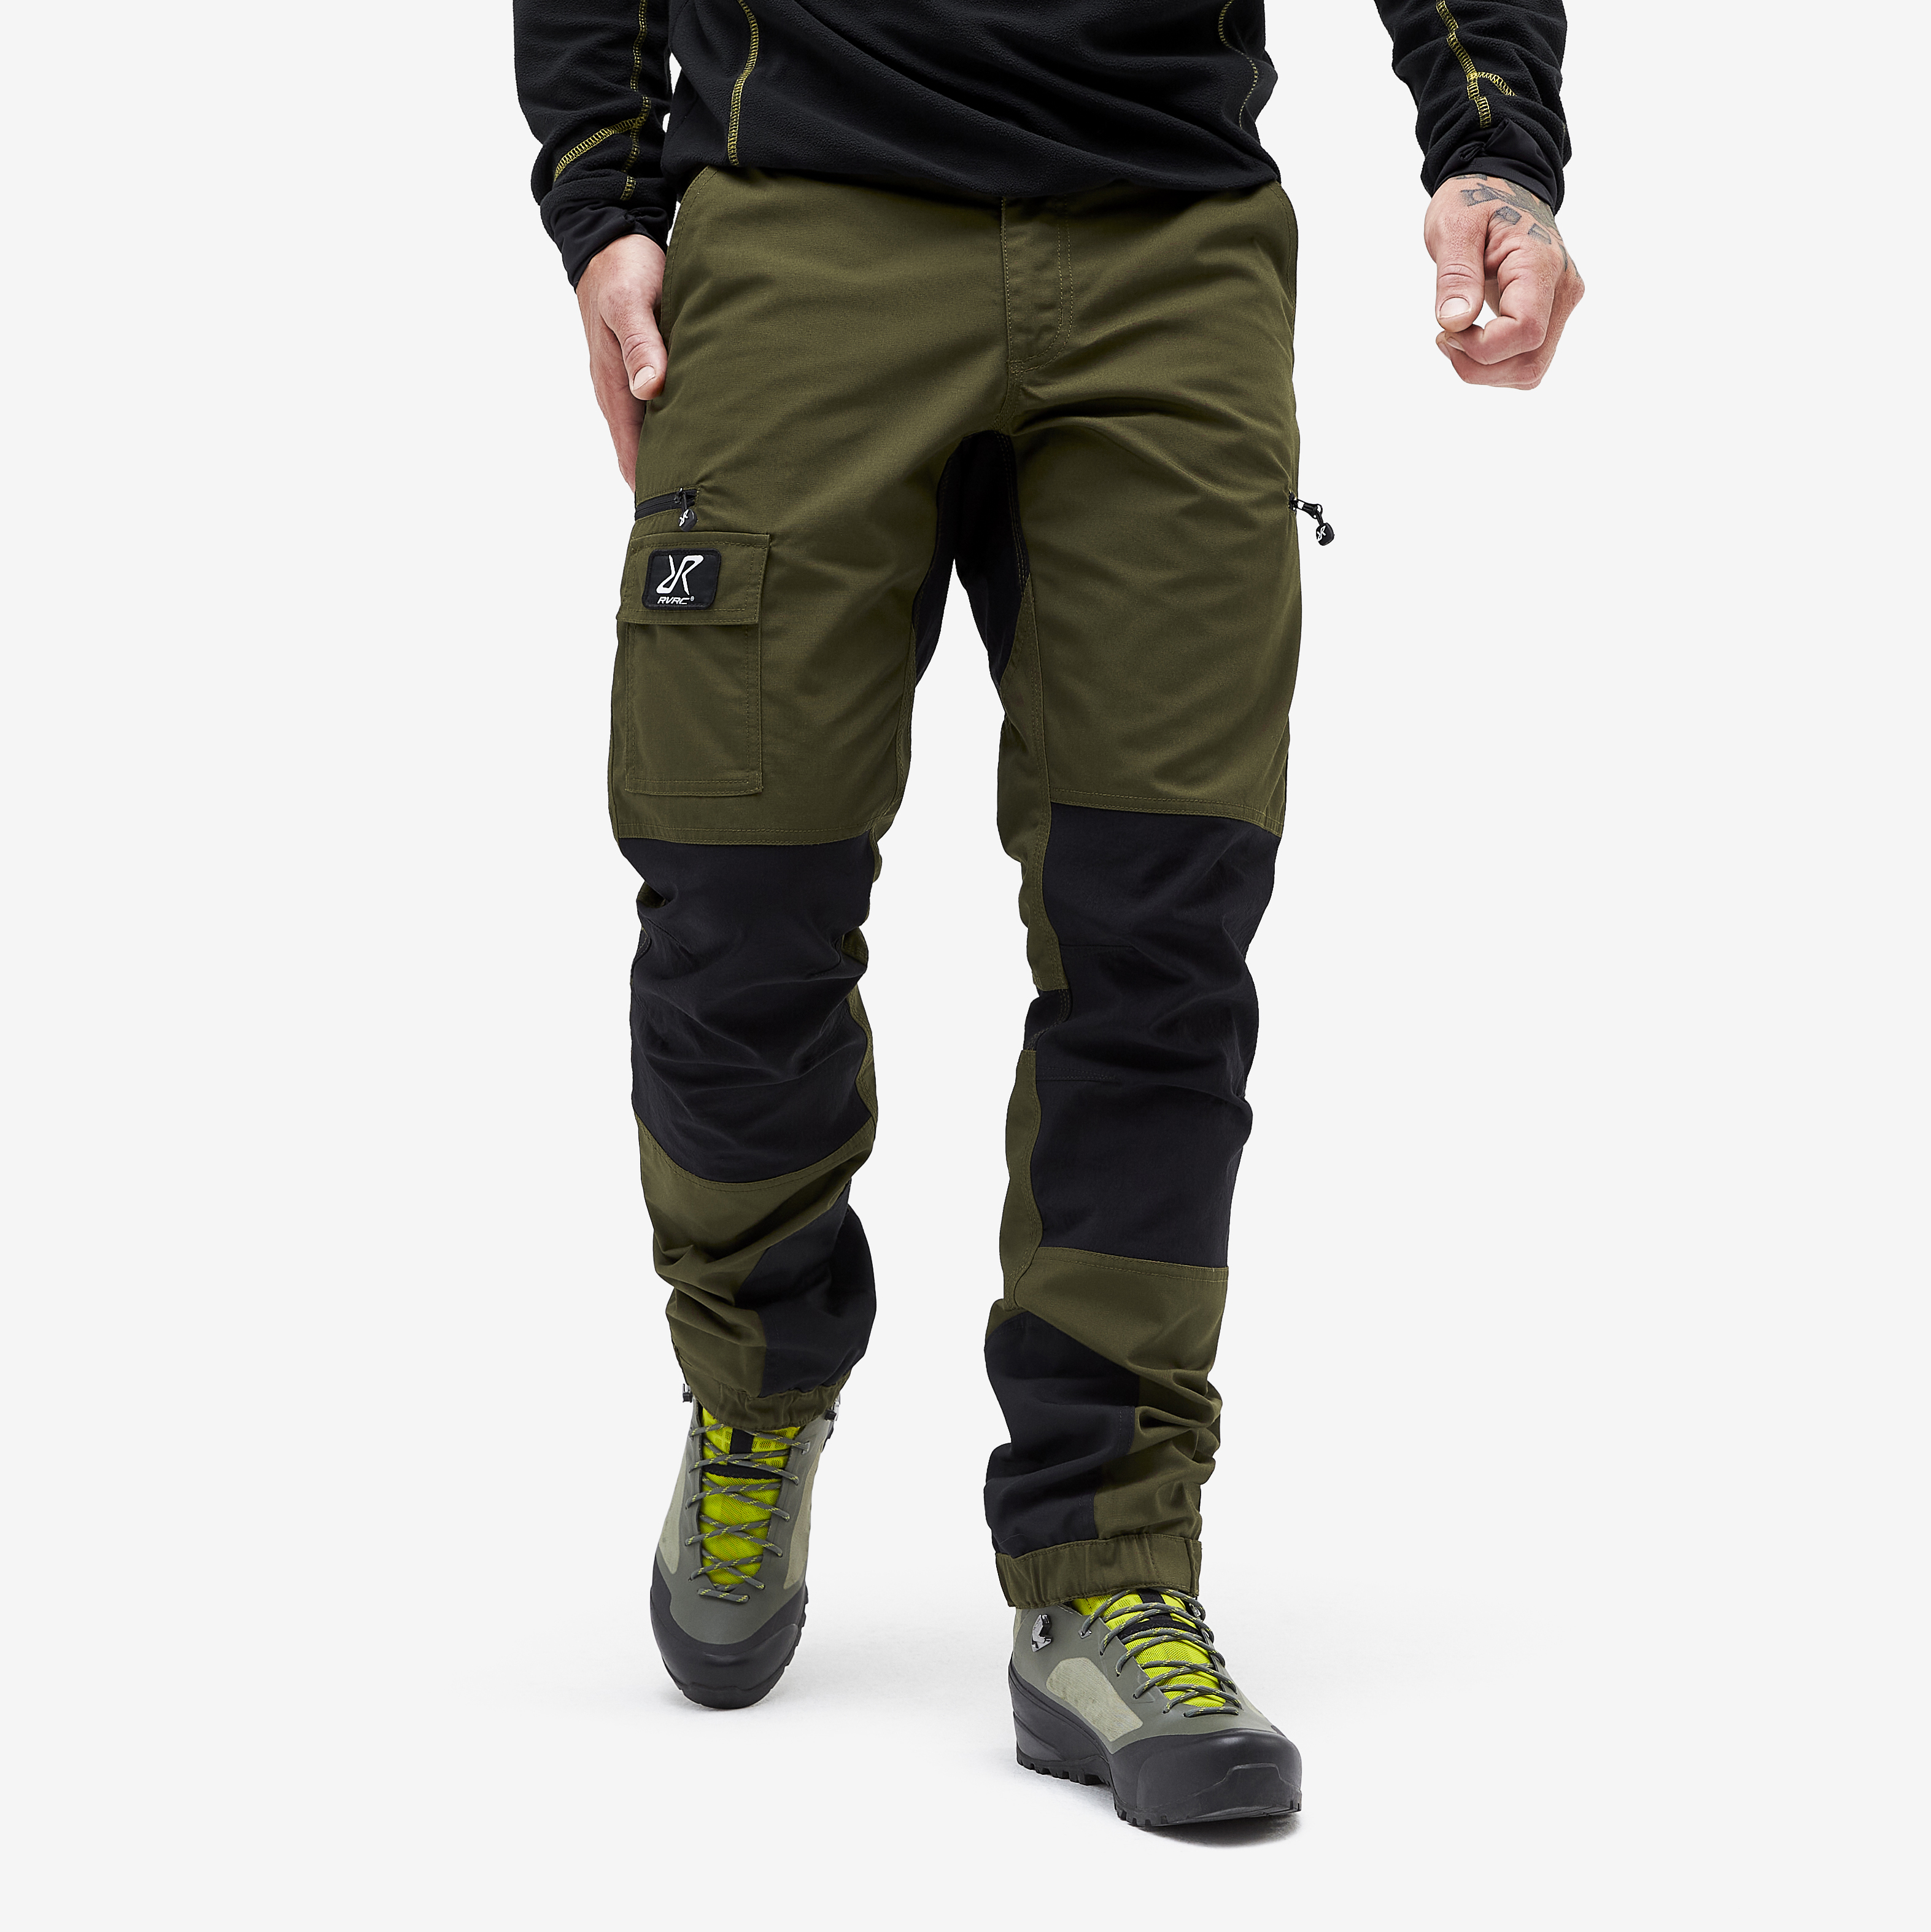 Nordwand walking trousers for men in green